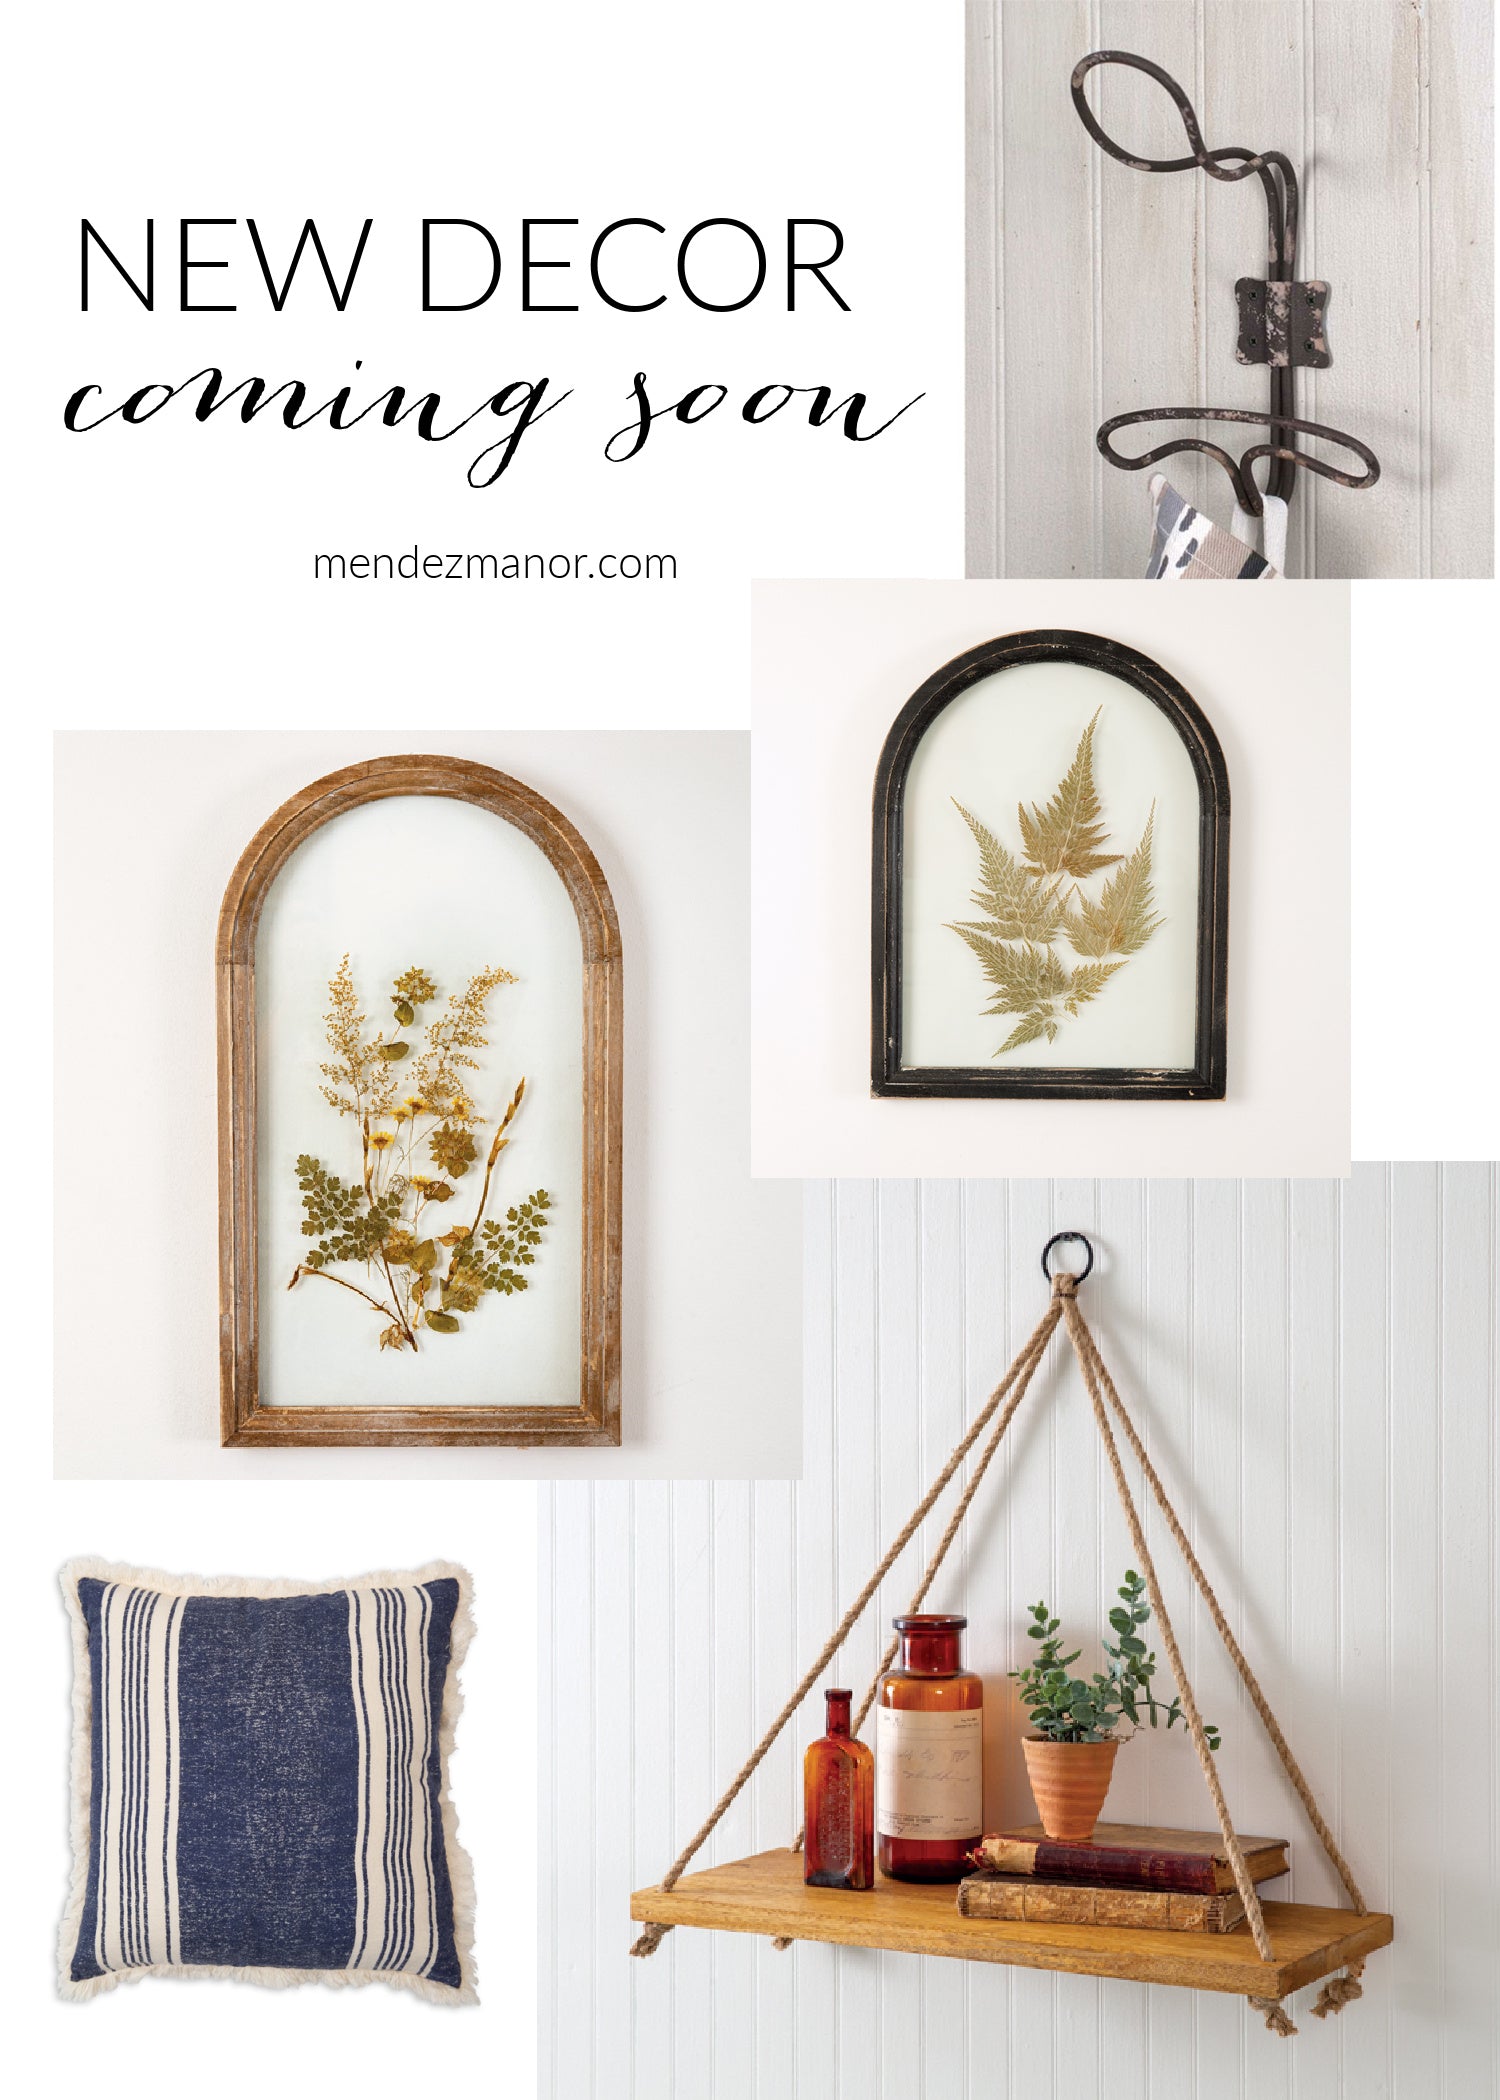 Introducing the CTW Home Collection: New Decor Coming Soon